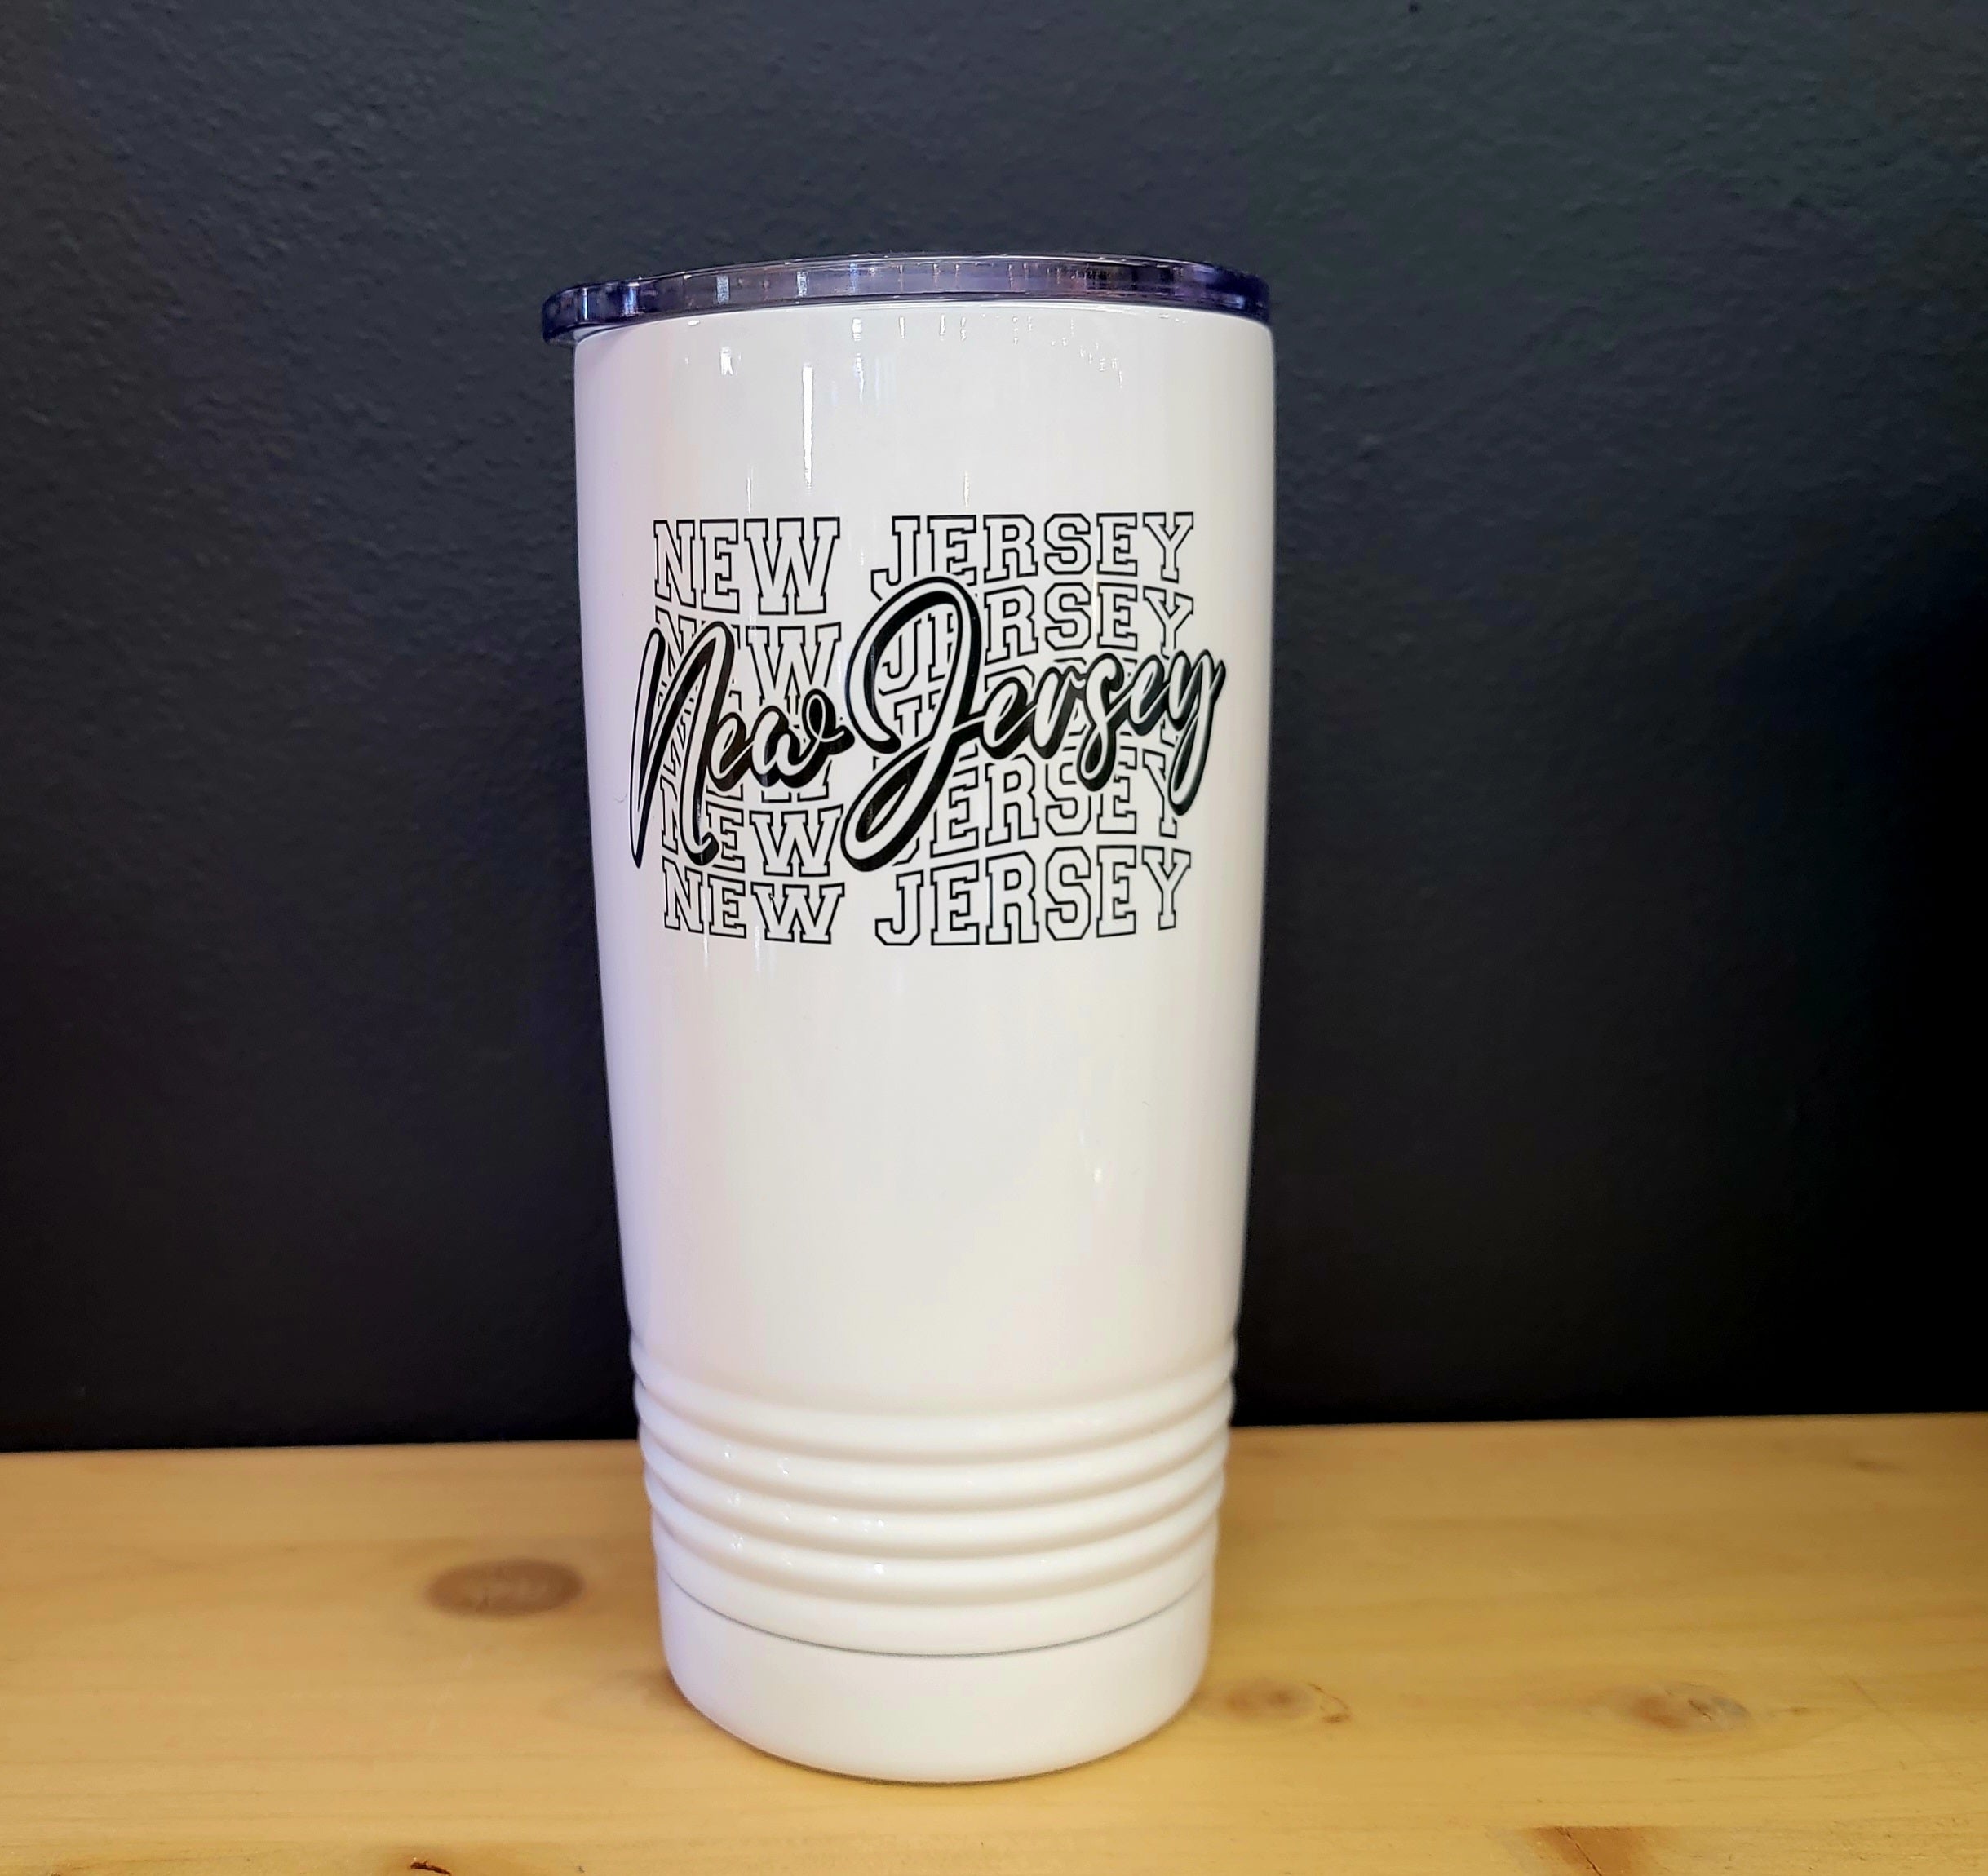 20 oz insulated cup for hot or cold beverages with NJ theme.